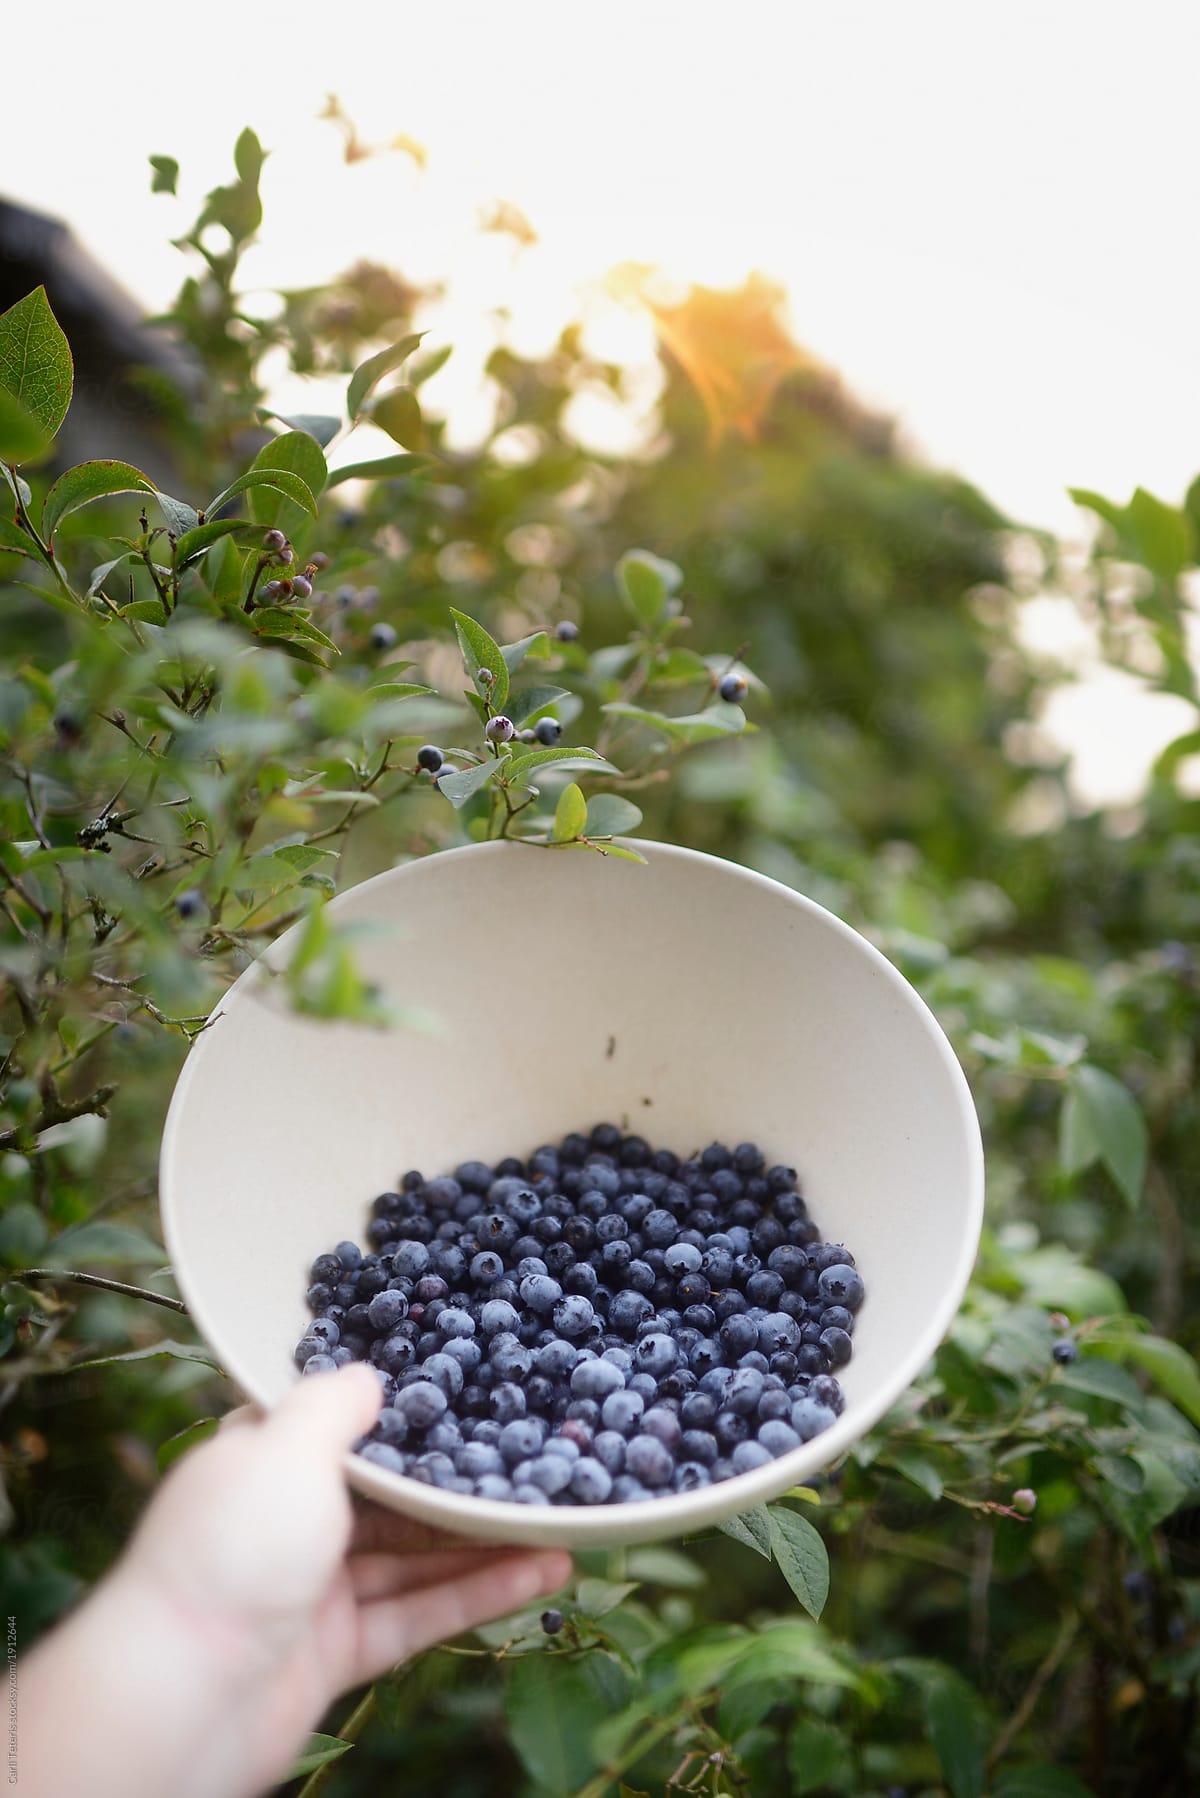 Hand holding a bowl of freshly picked blueberries in a blue berry bush at sunrise